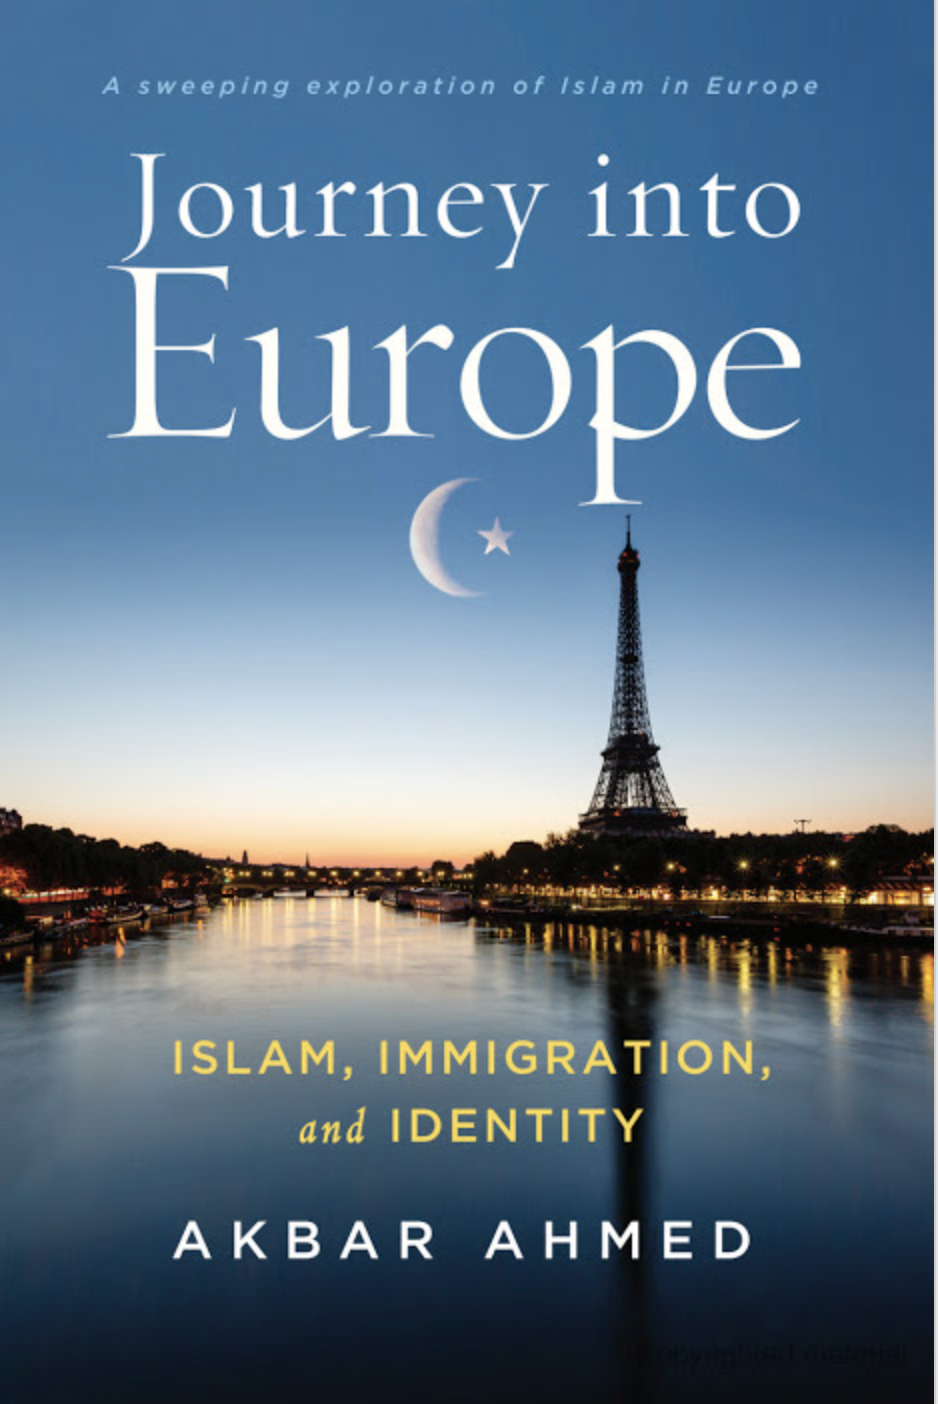 Journey into Europe book cover